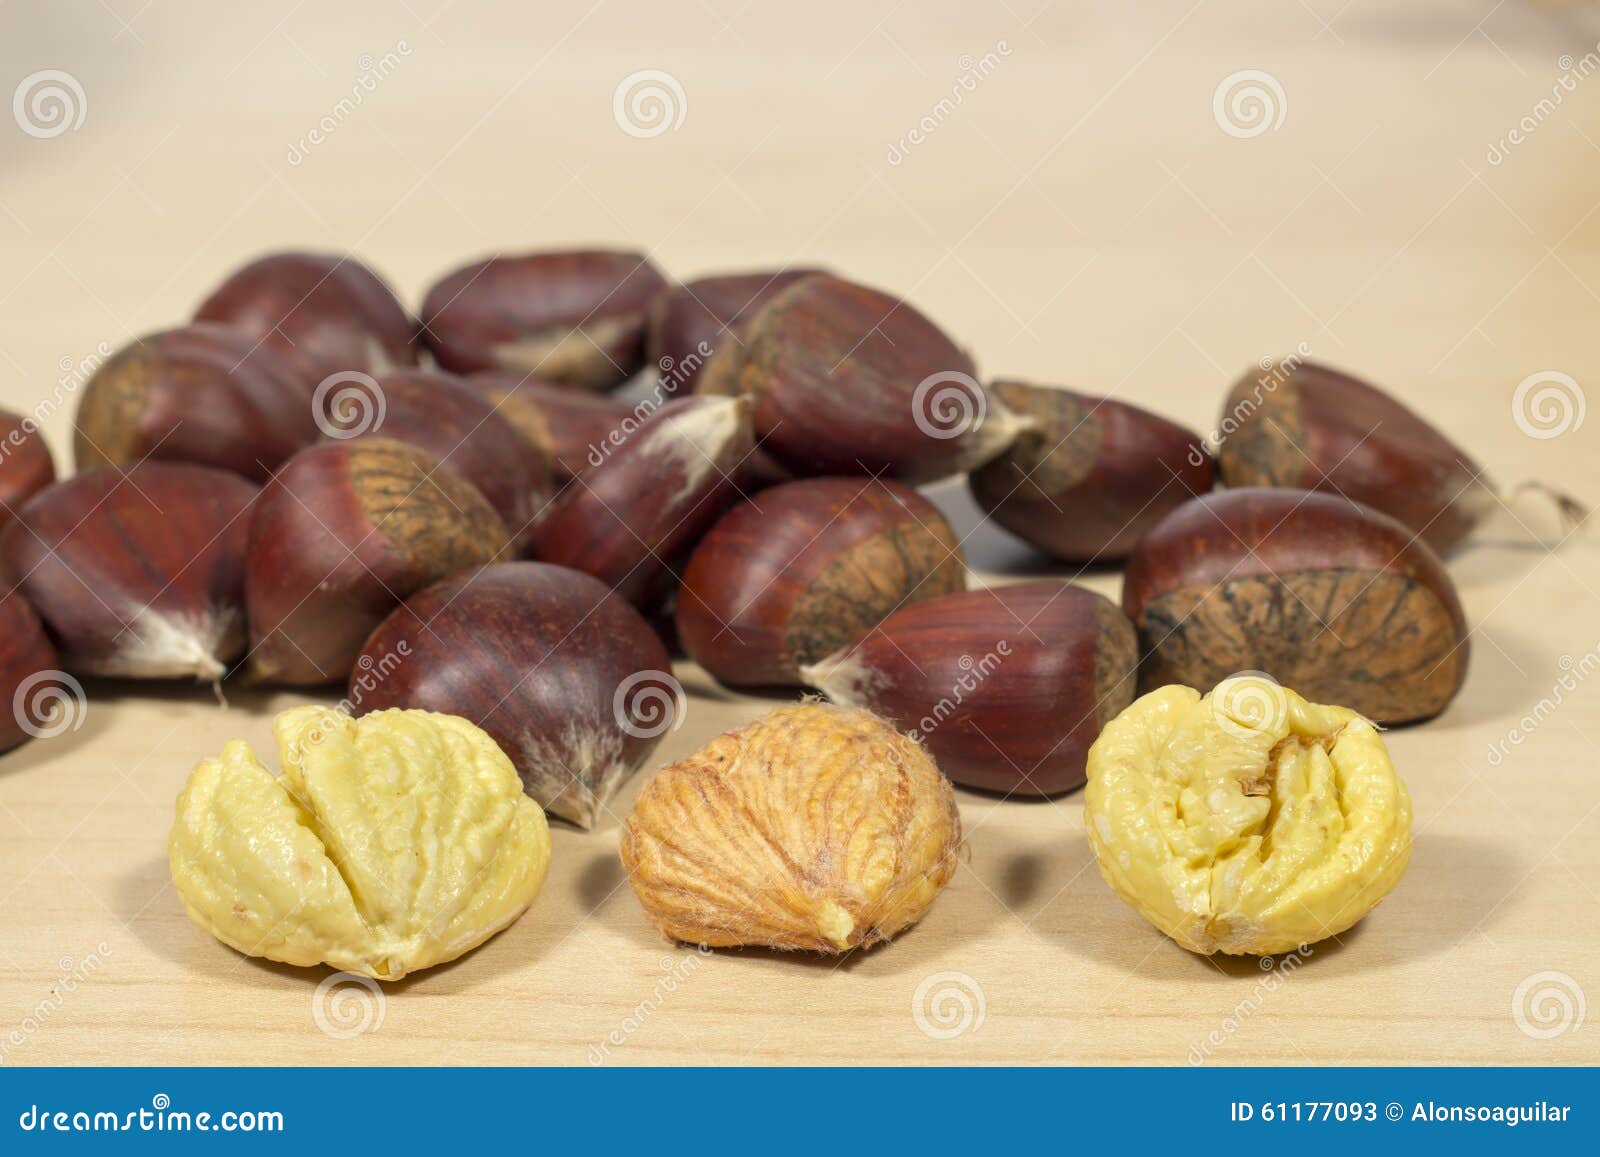 chestnuts, several of them peeled